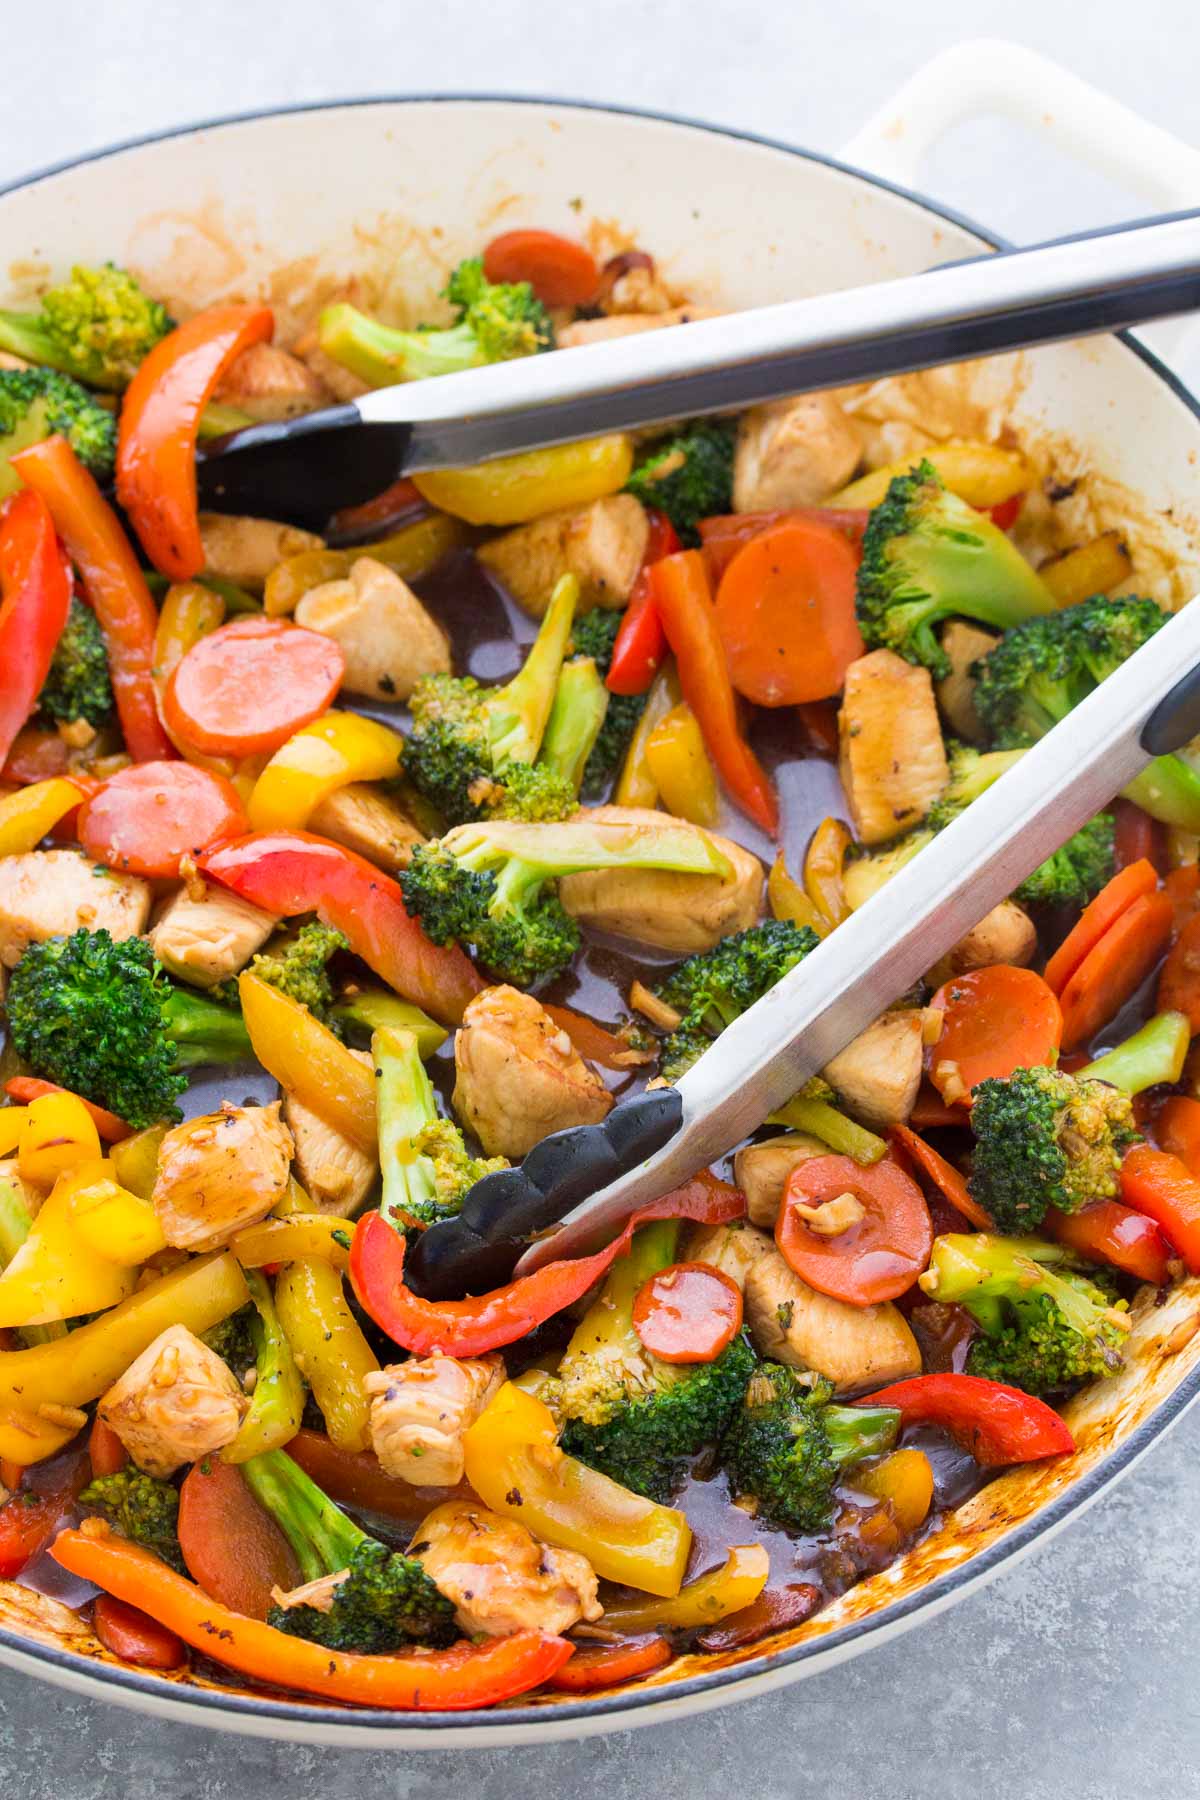 Chicken stir fry with vegetables and sauce in a large skillet.